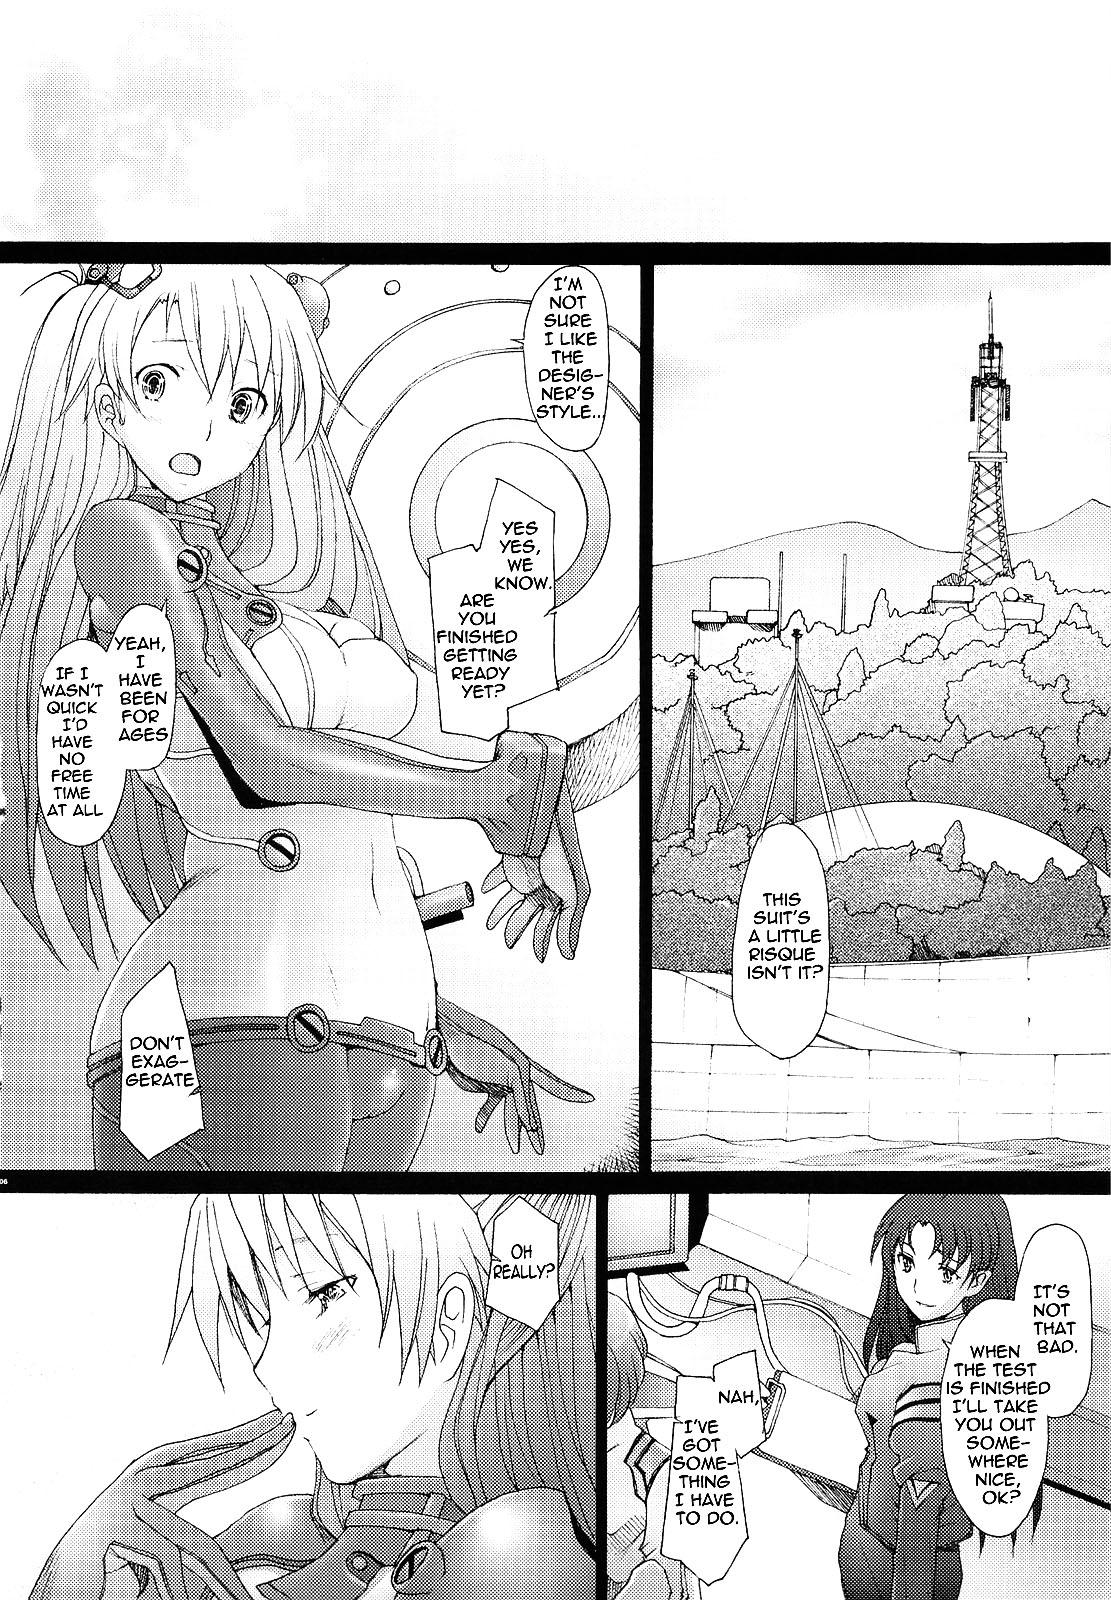 Shavedpussy Confusion LEVEL A vol. 3 - Neon genesis evangelion Tgirl - Page 6